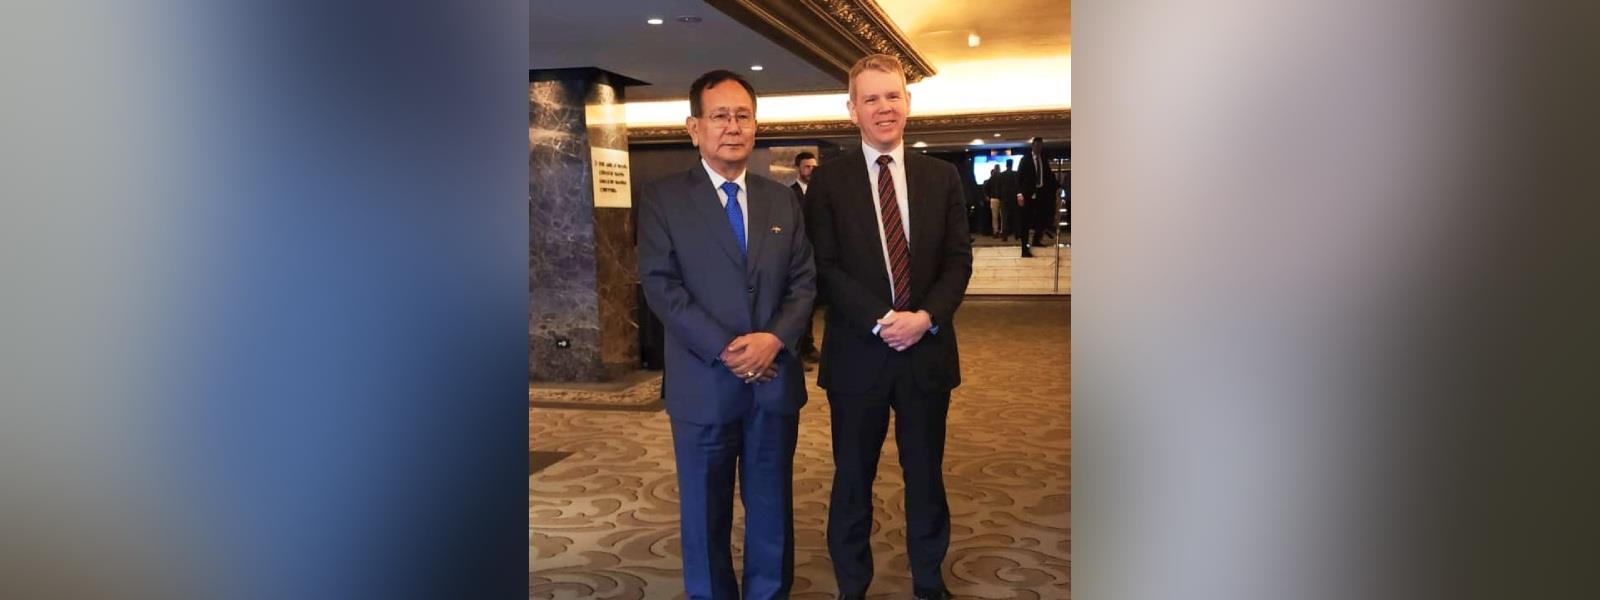 Minister of State for External Affairs Dr. Rajkumar Ranjan Singh welcomed H.E. Mr. Chris Hipkins, Prime Minister of New Zealand at the first India Business Summit in Wellington